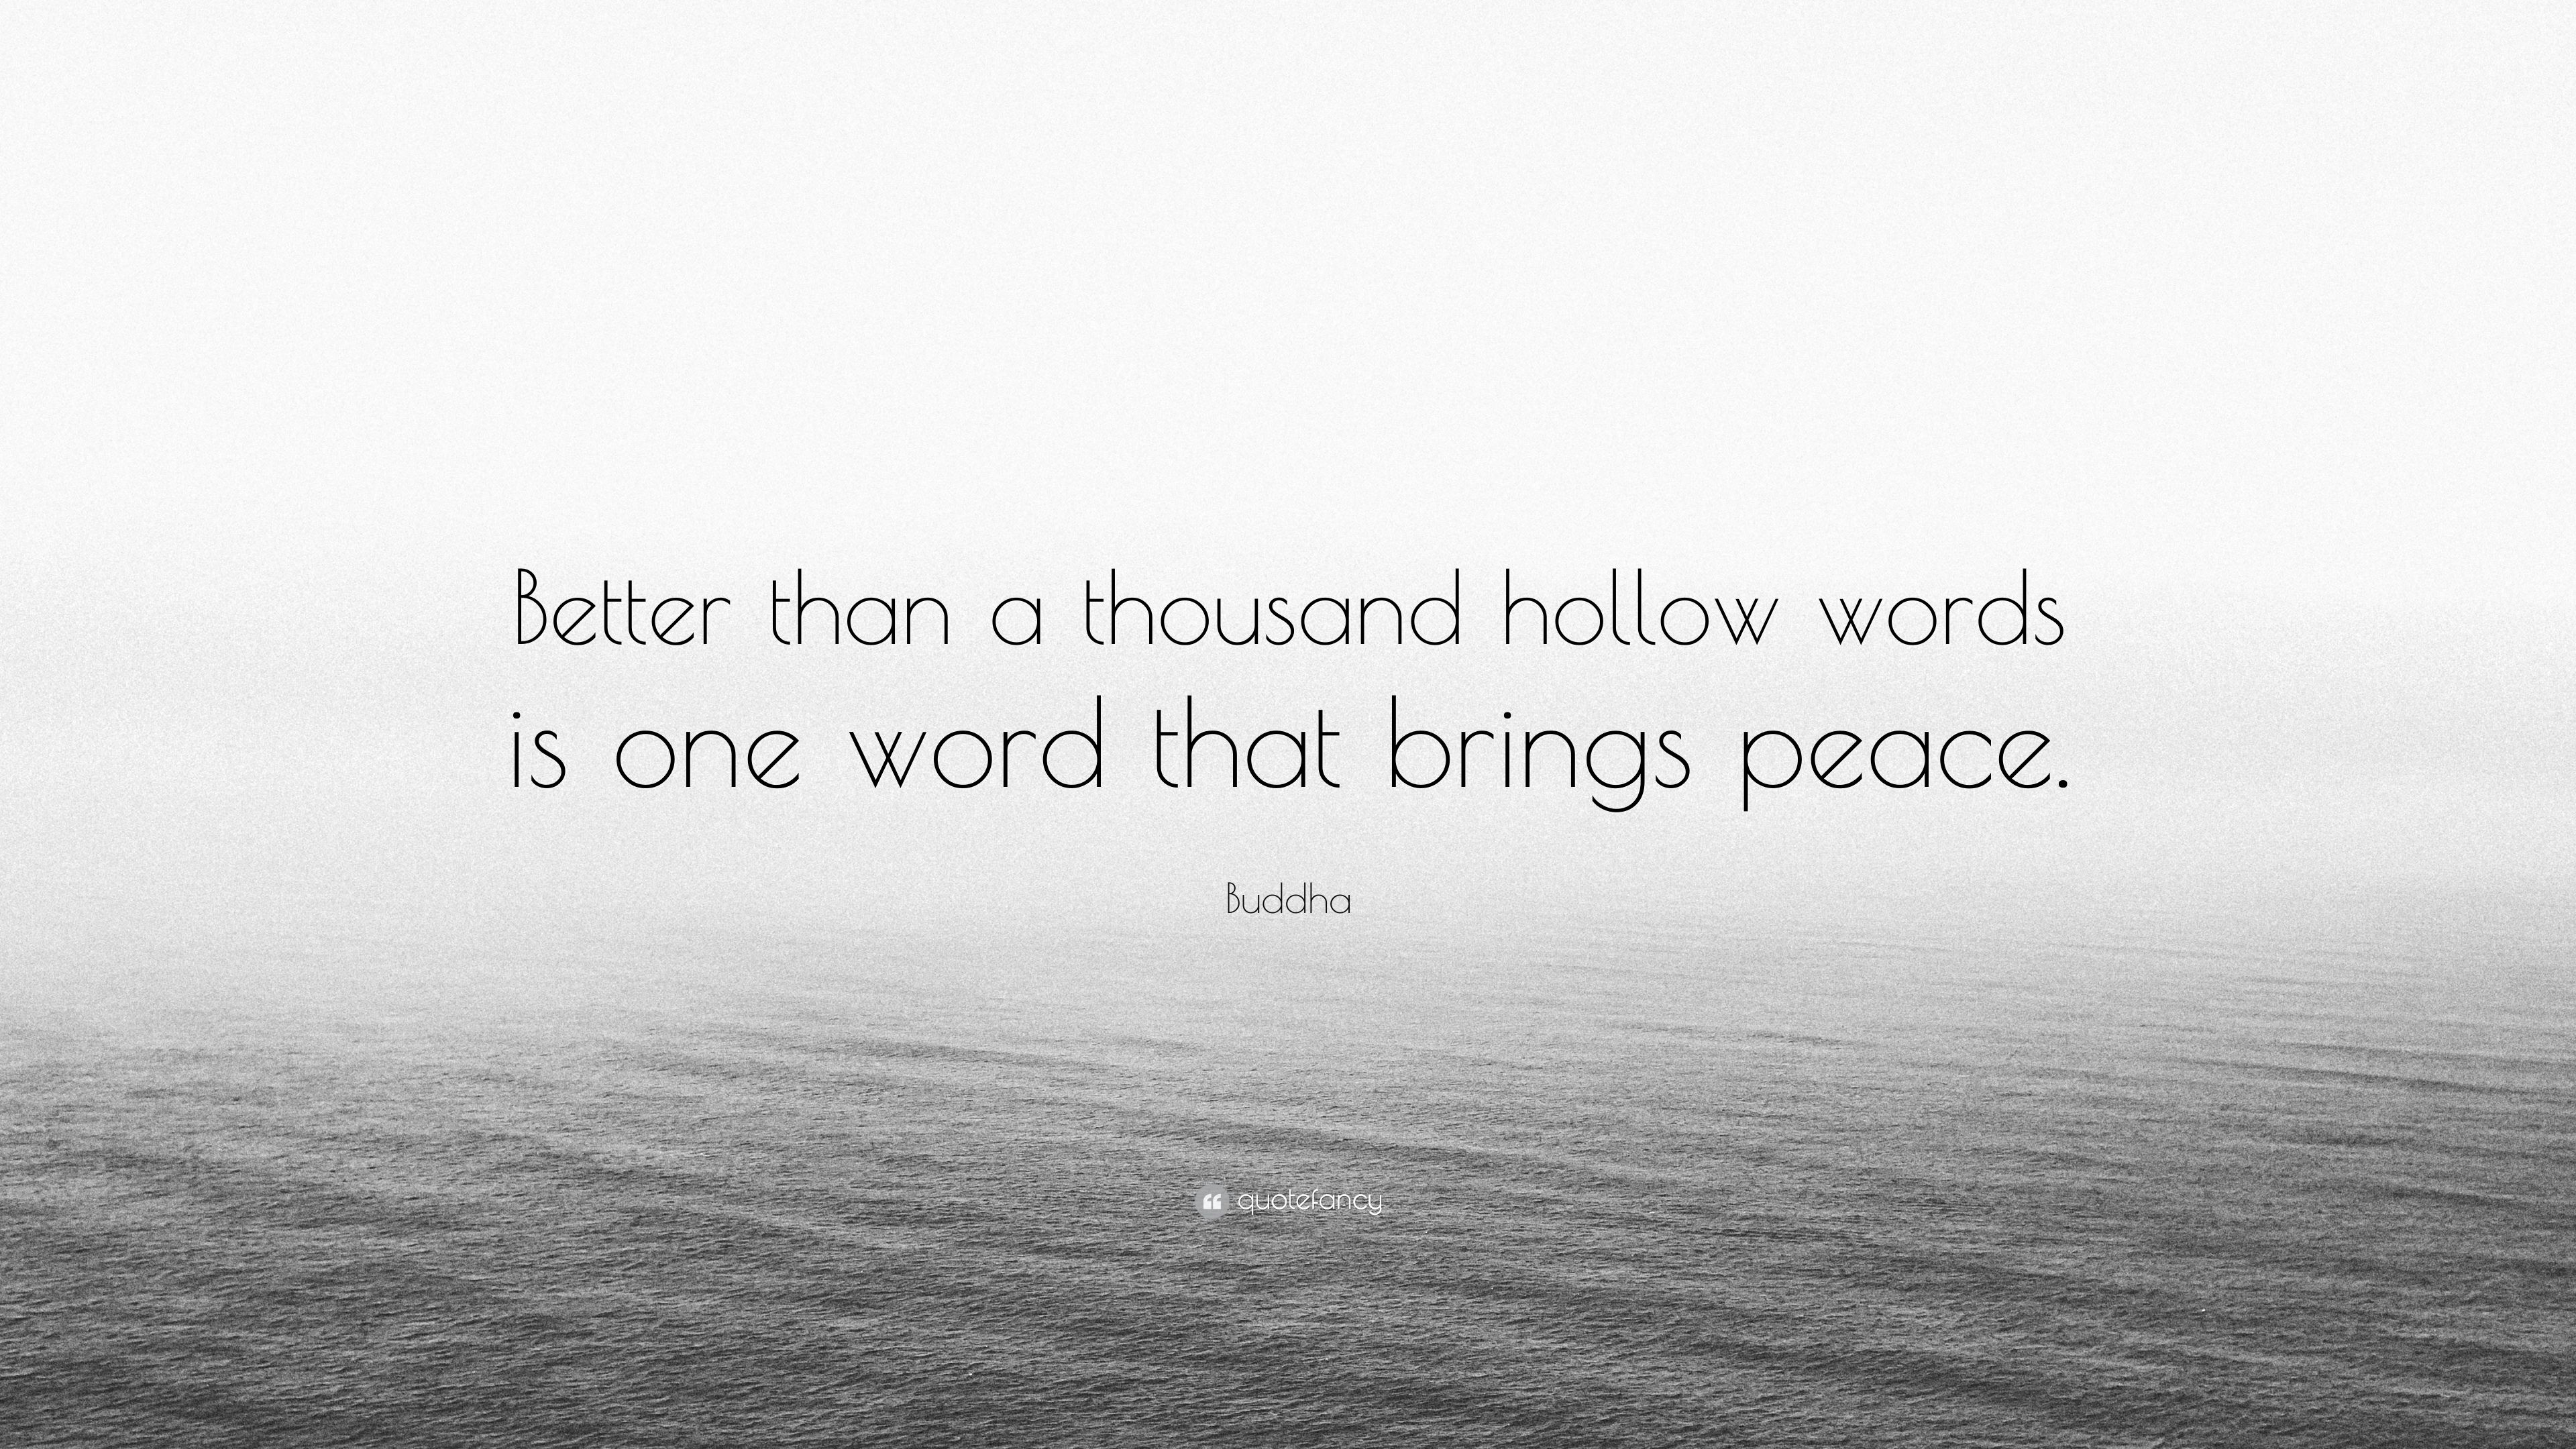 Buddha Quote: "Better than a thousand hollow words is one word.